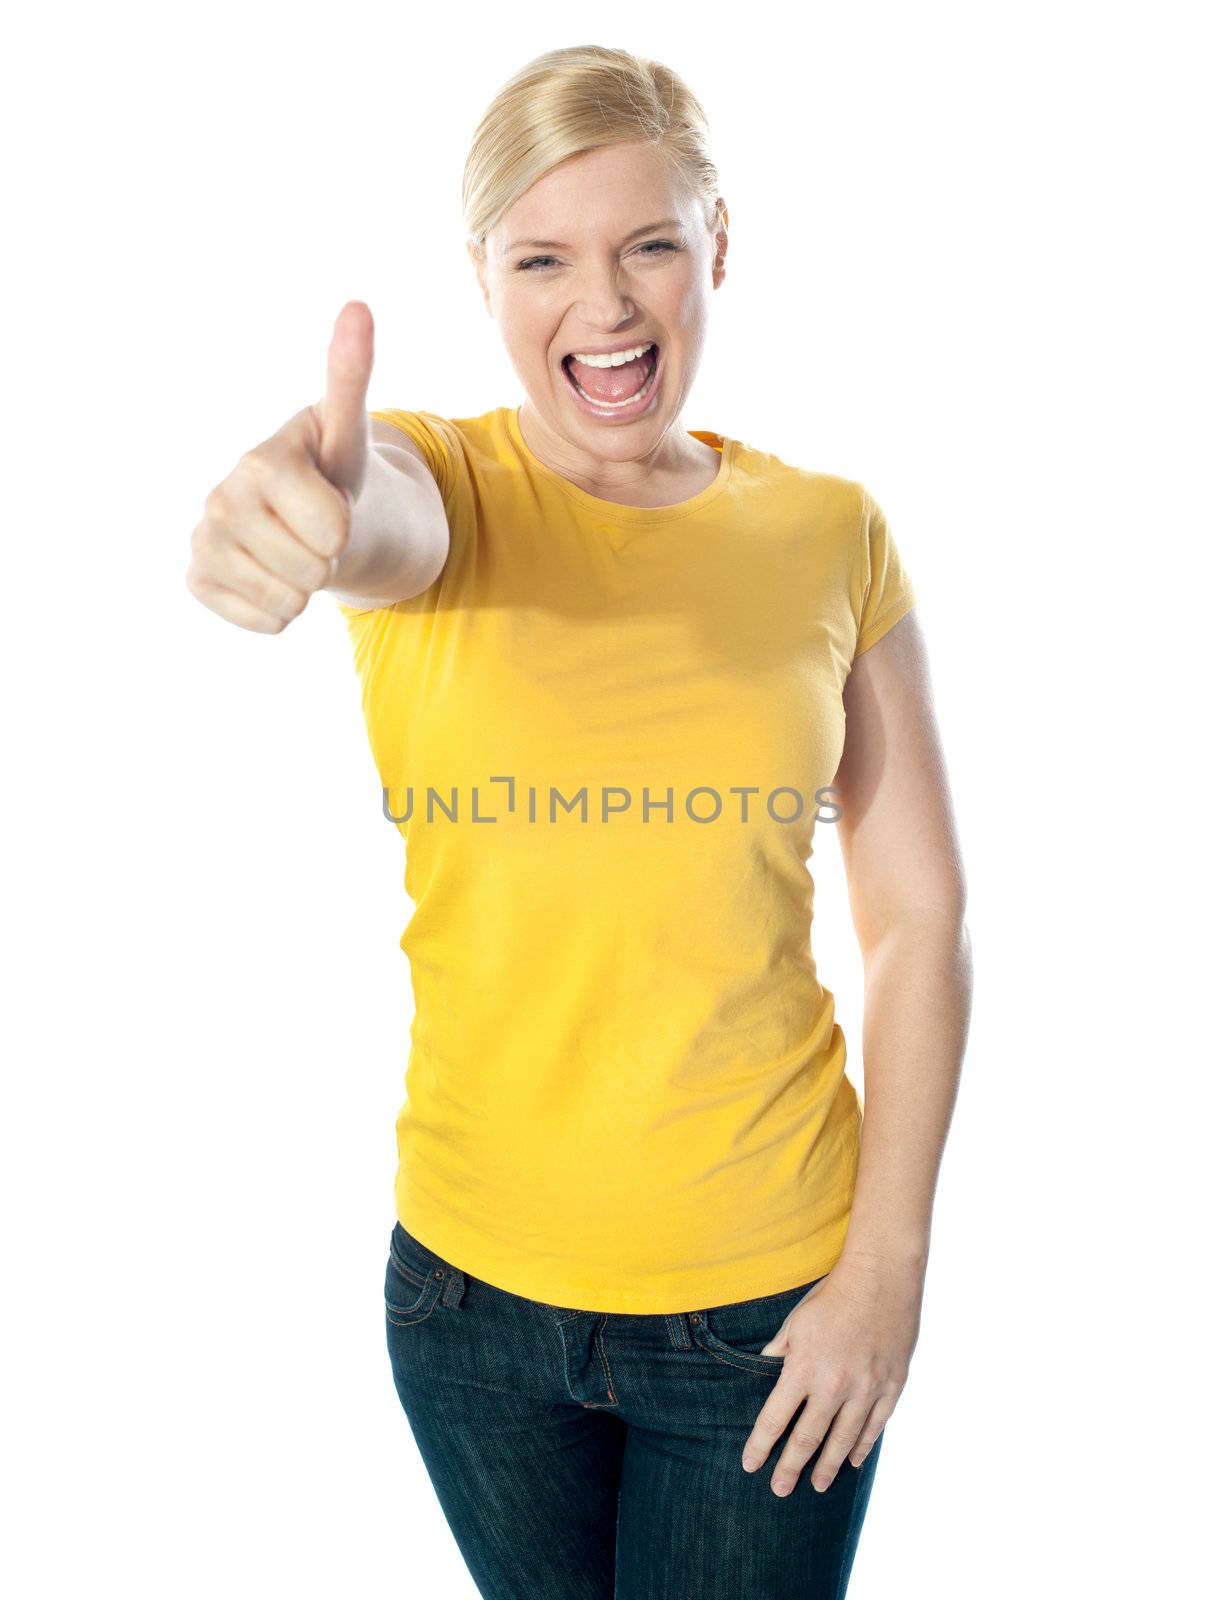 Smiling gorgeous girl showing thumbs-up by stockyimages